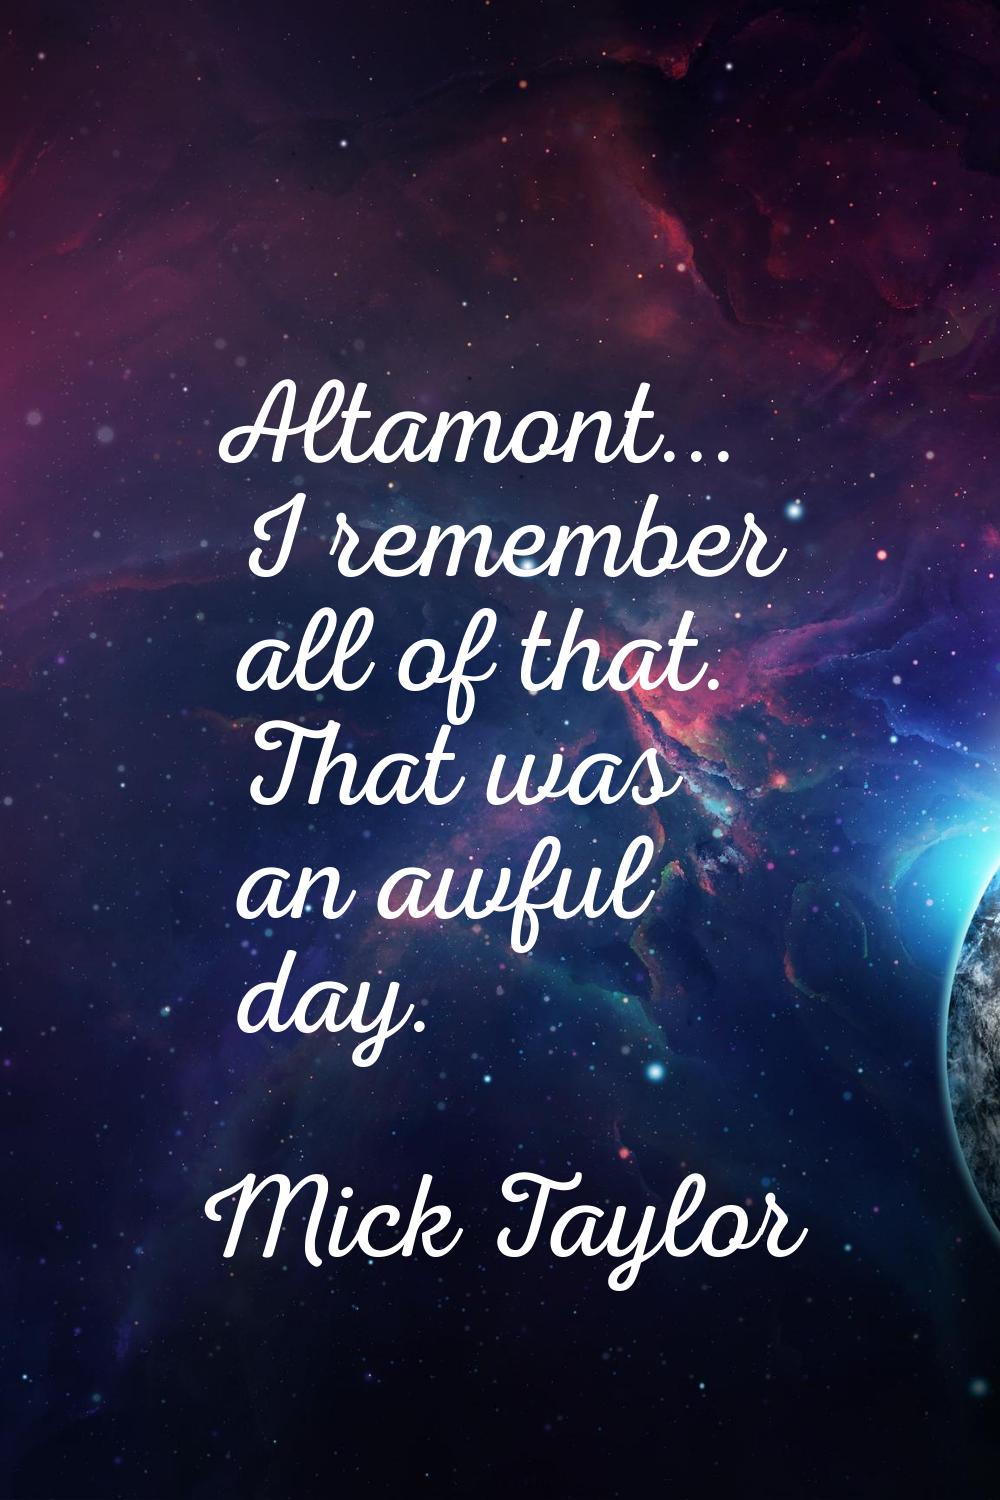 Altamont... I remember all of that. That was an awful day.